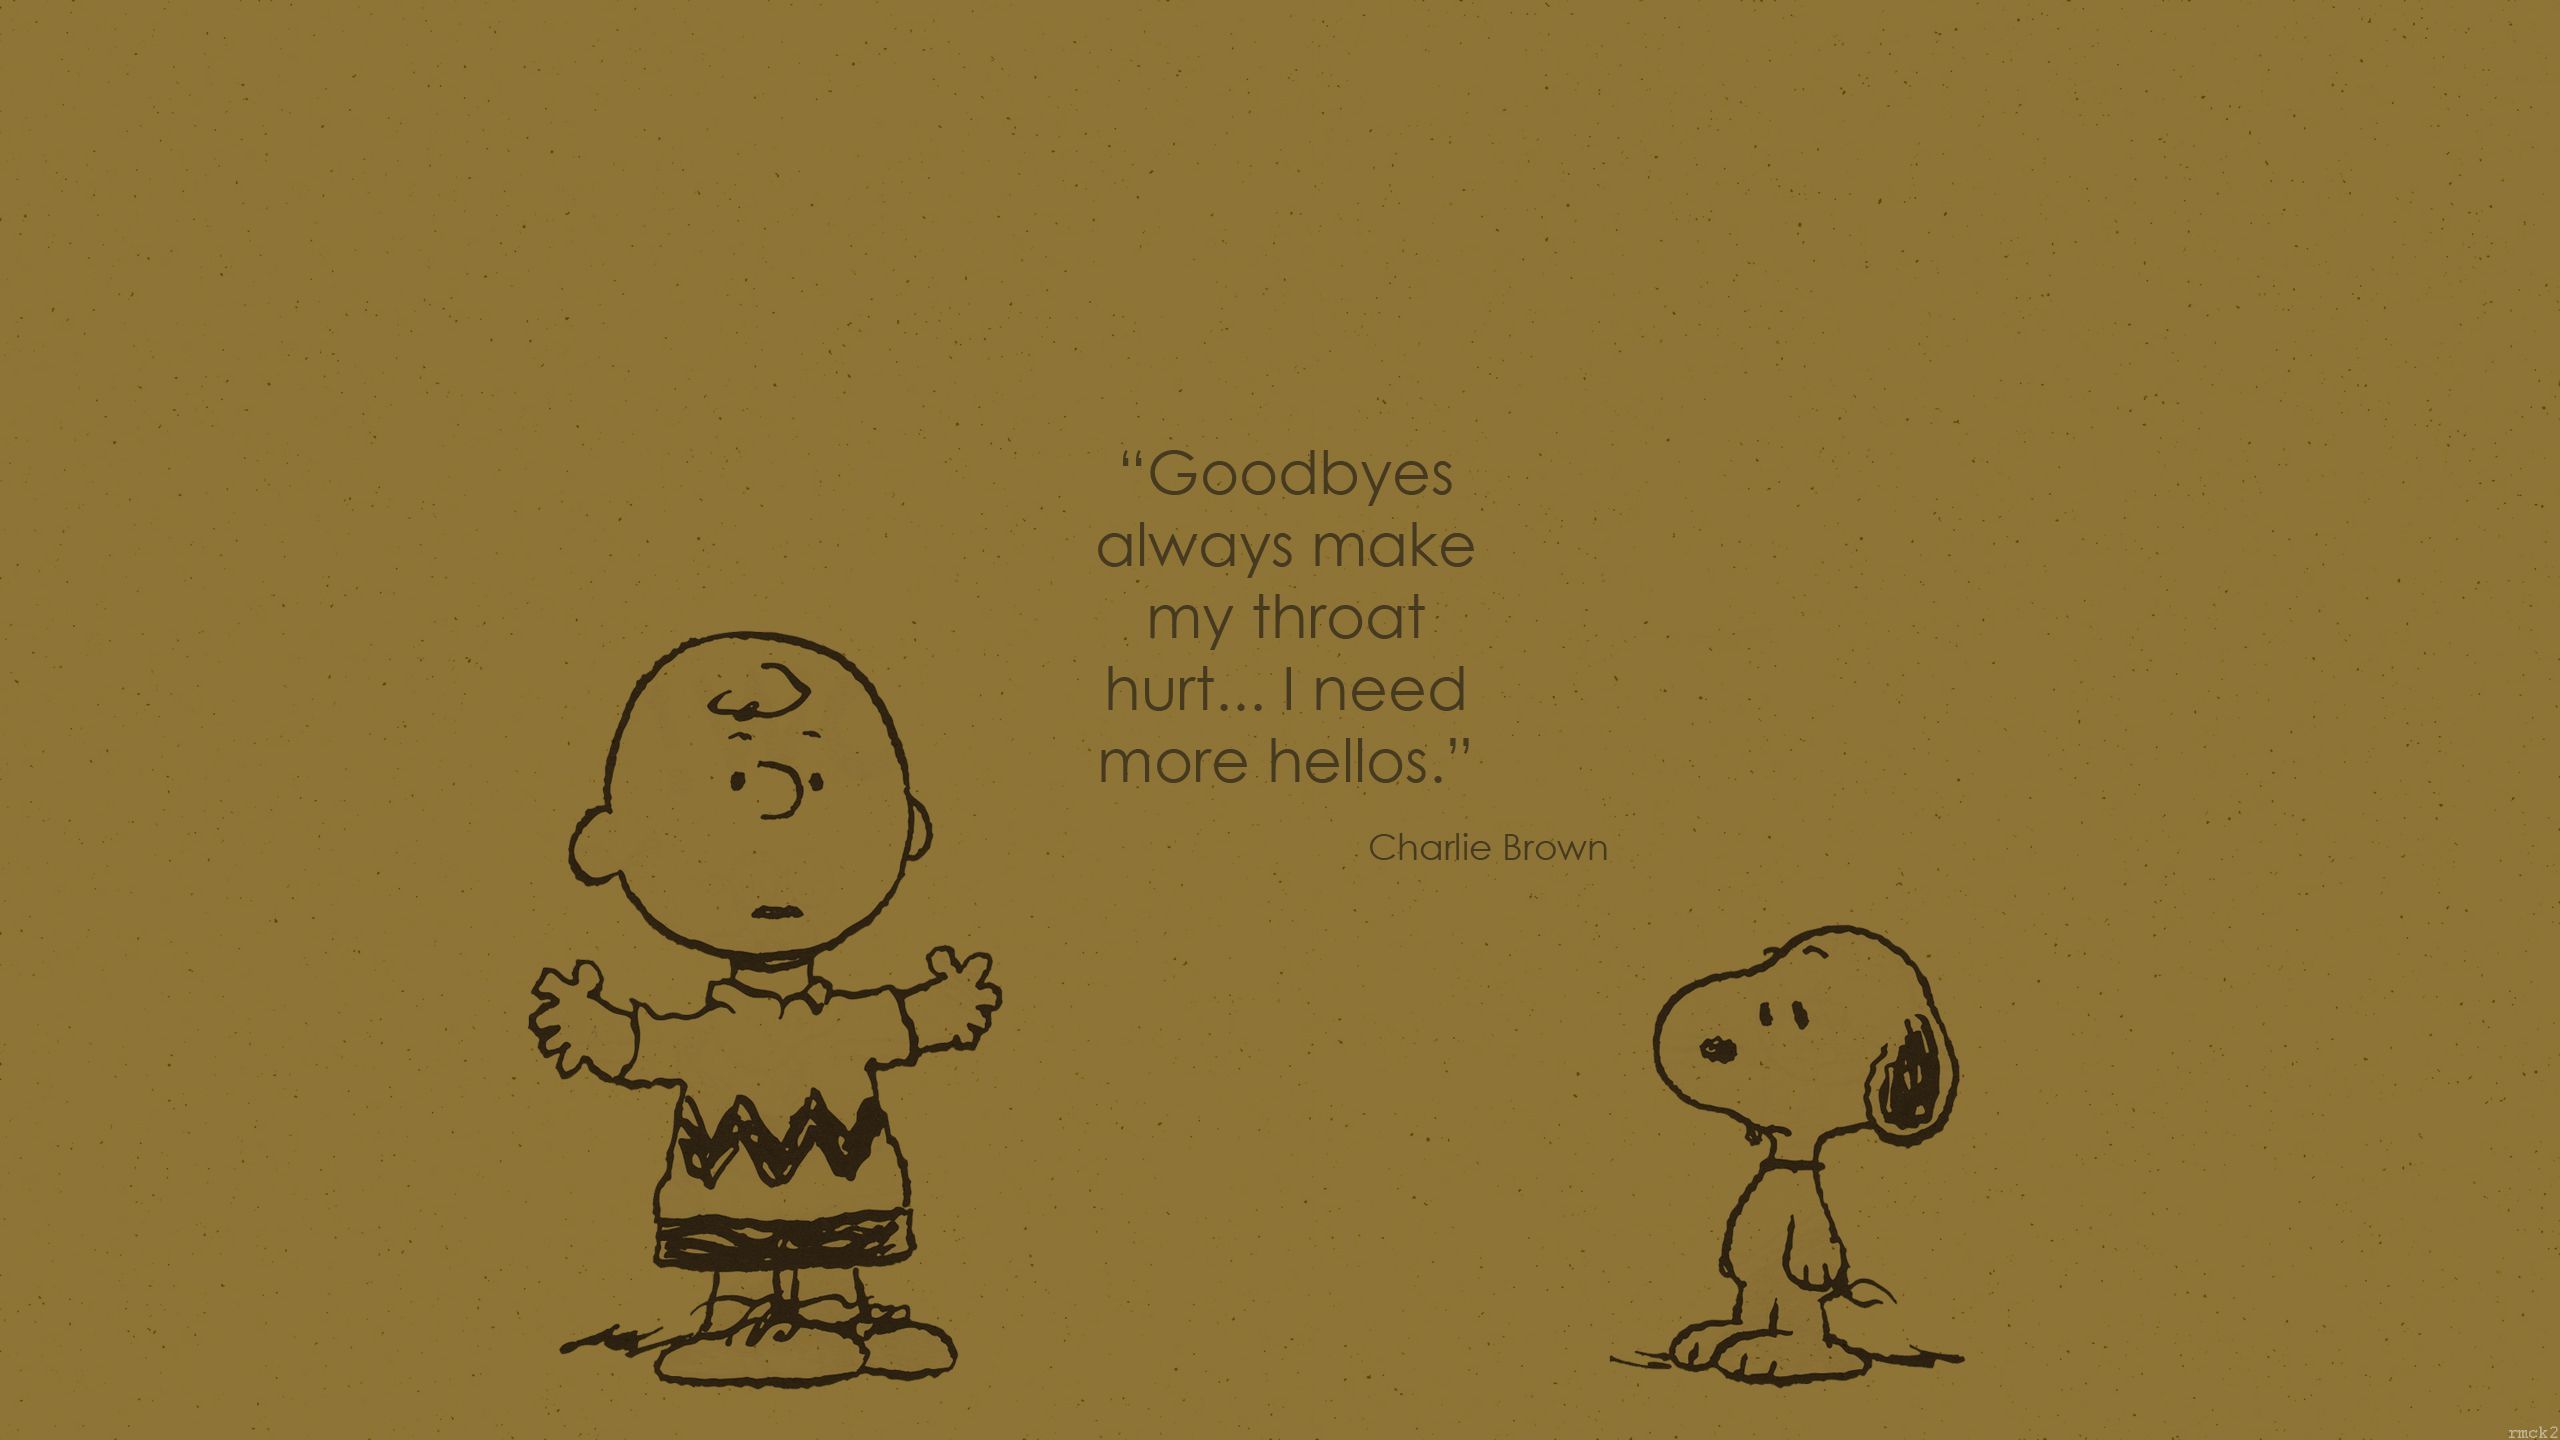 Wallpaper Charlie Brown quote 2